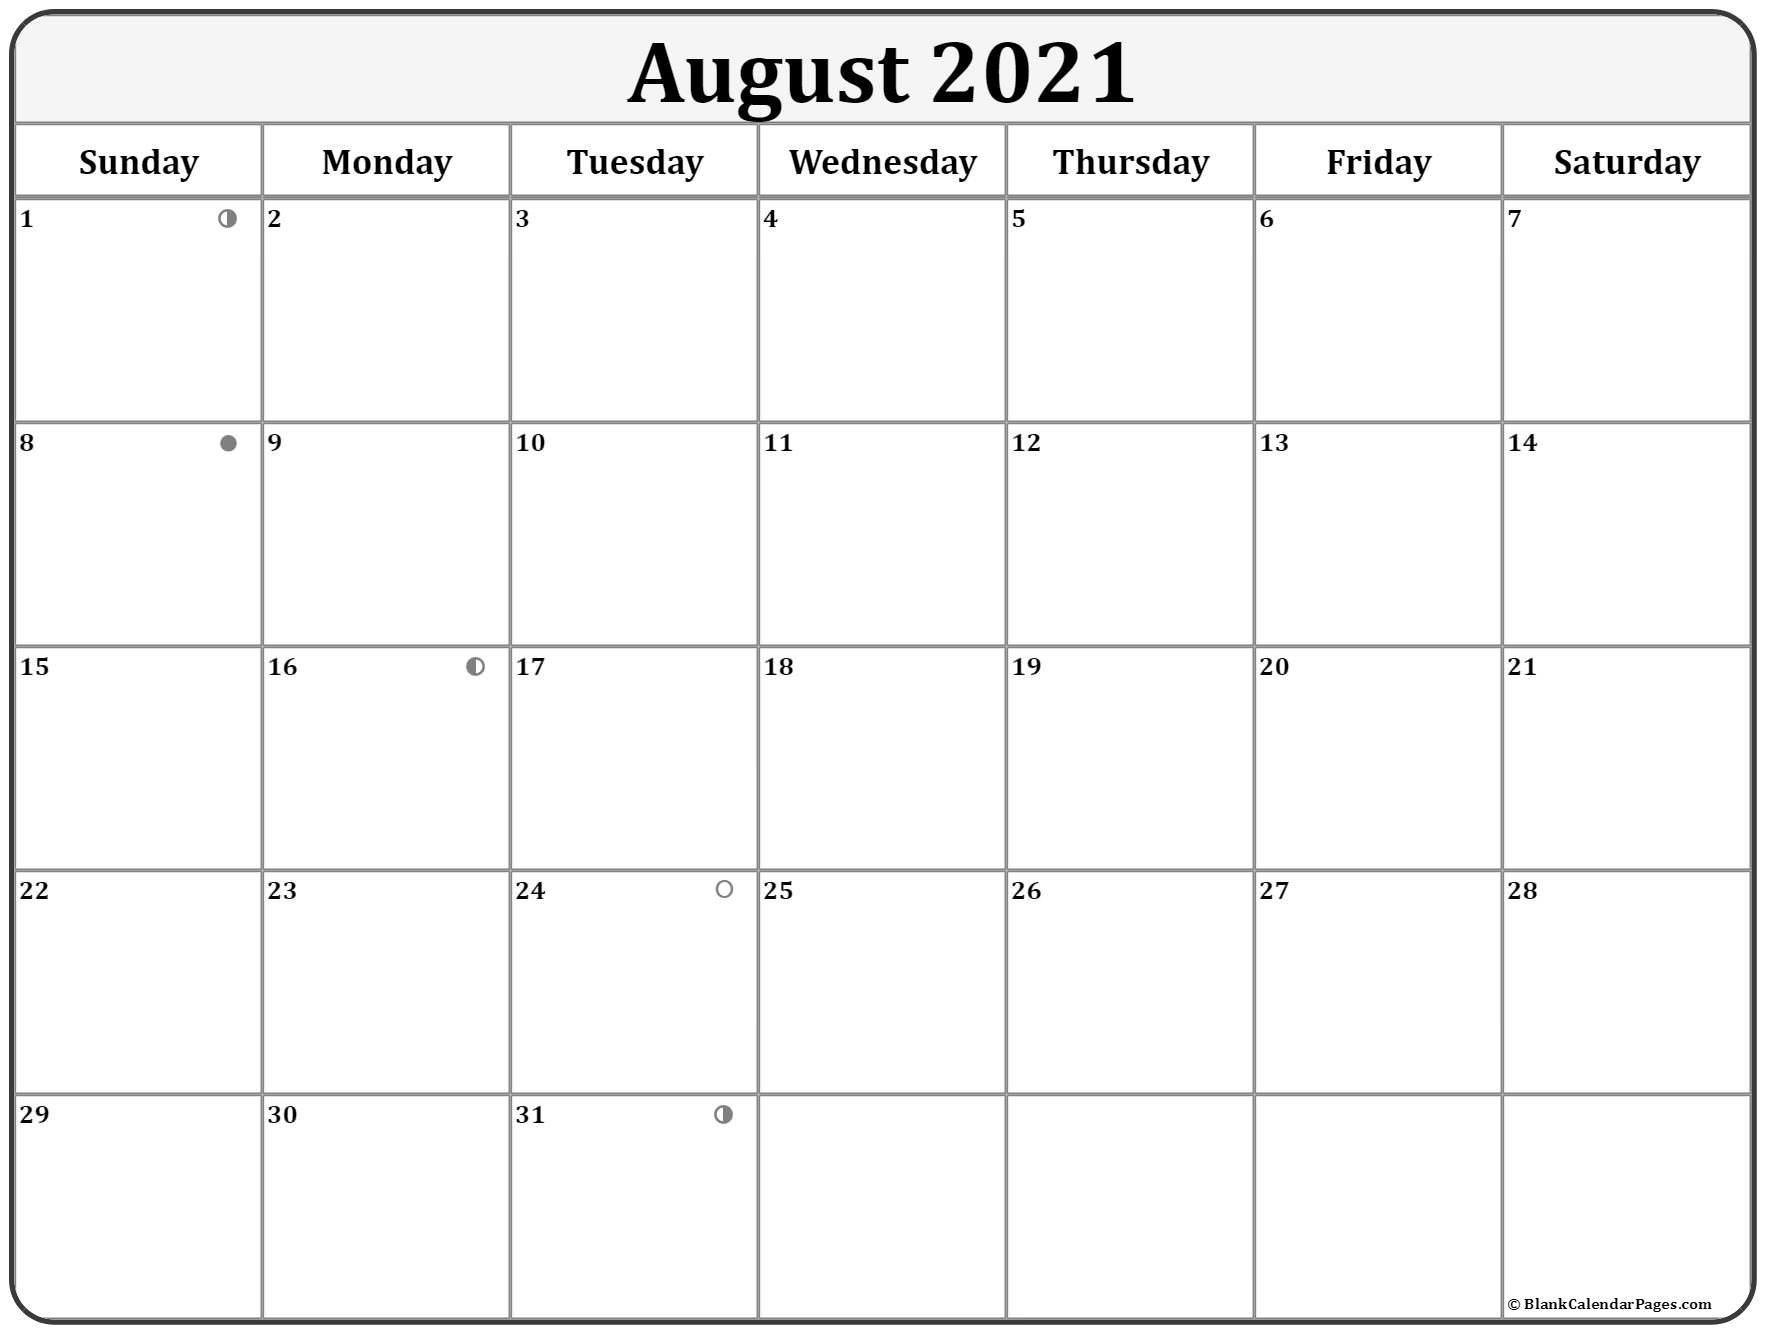 Get August Calendar 2021 With Moon Cycle